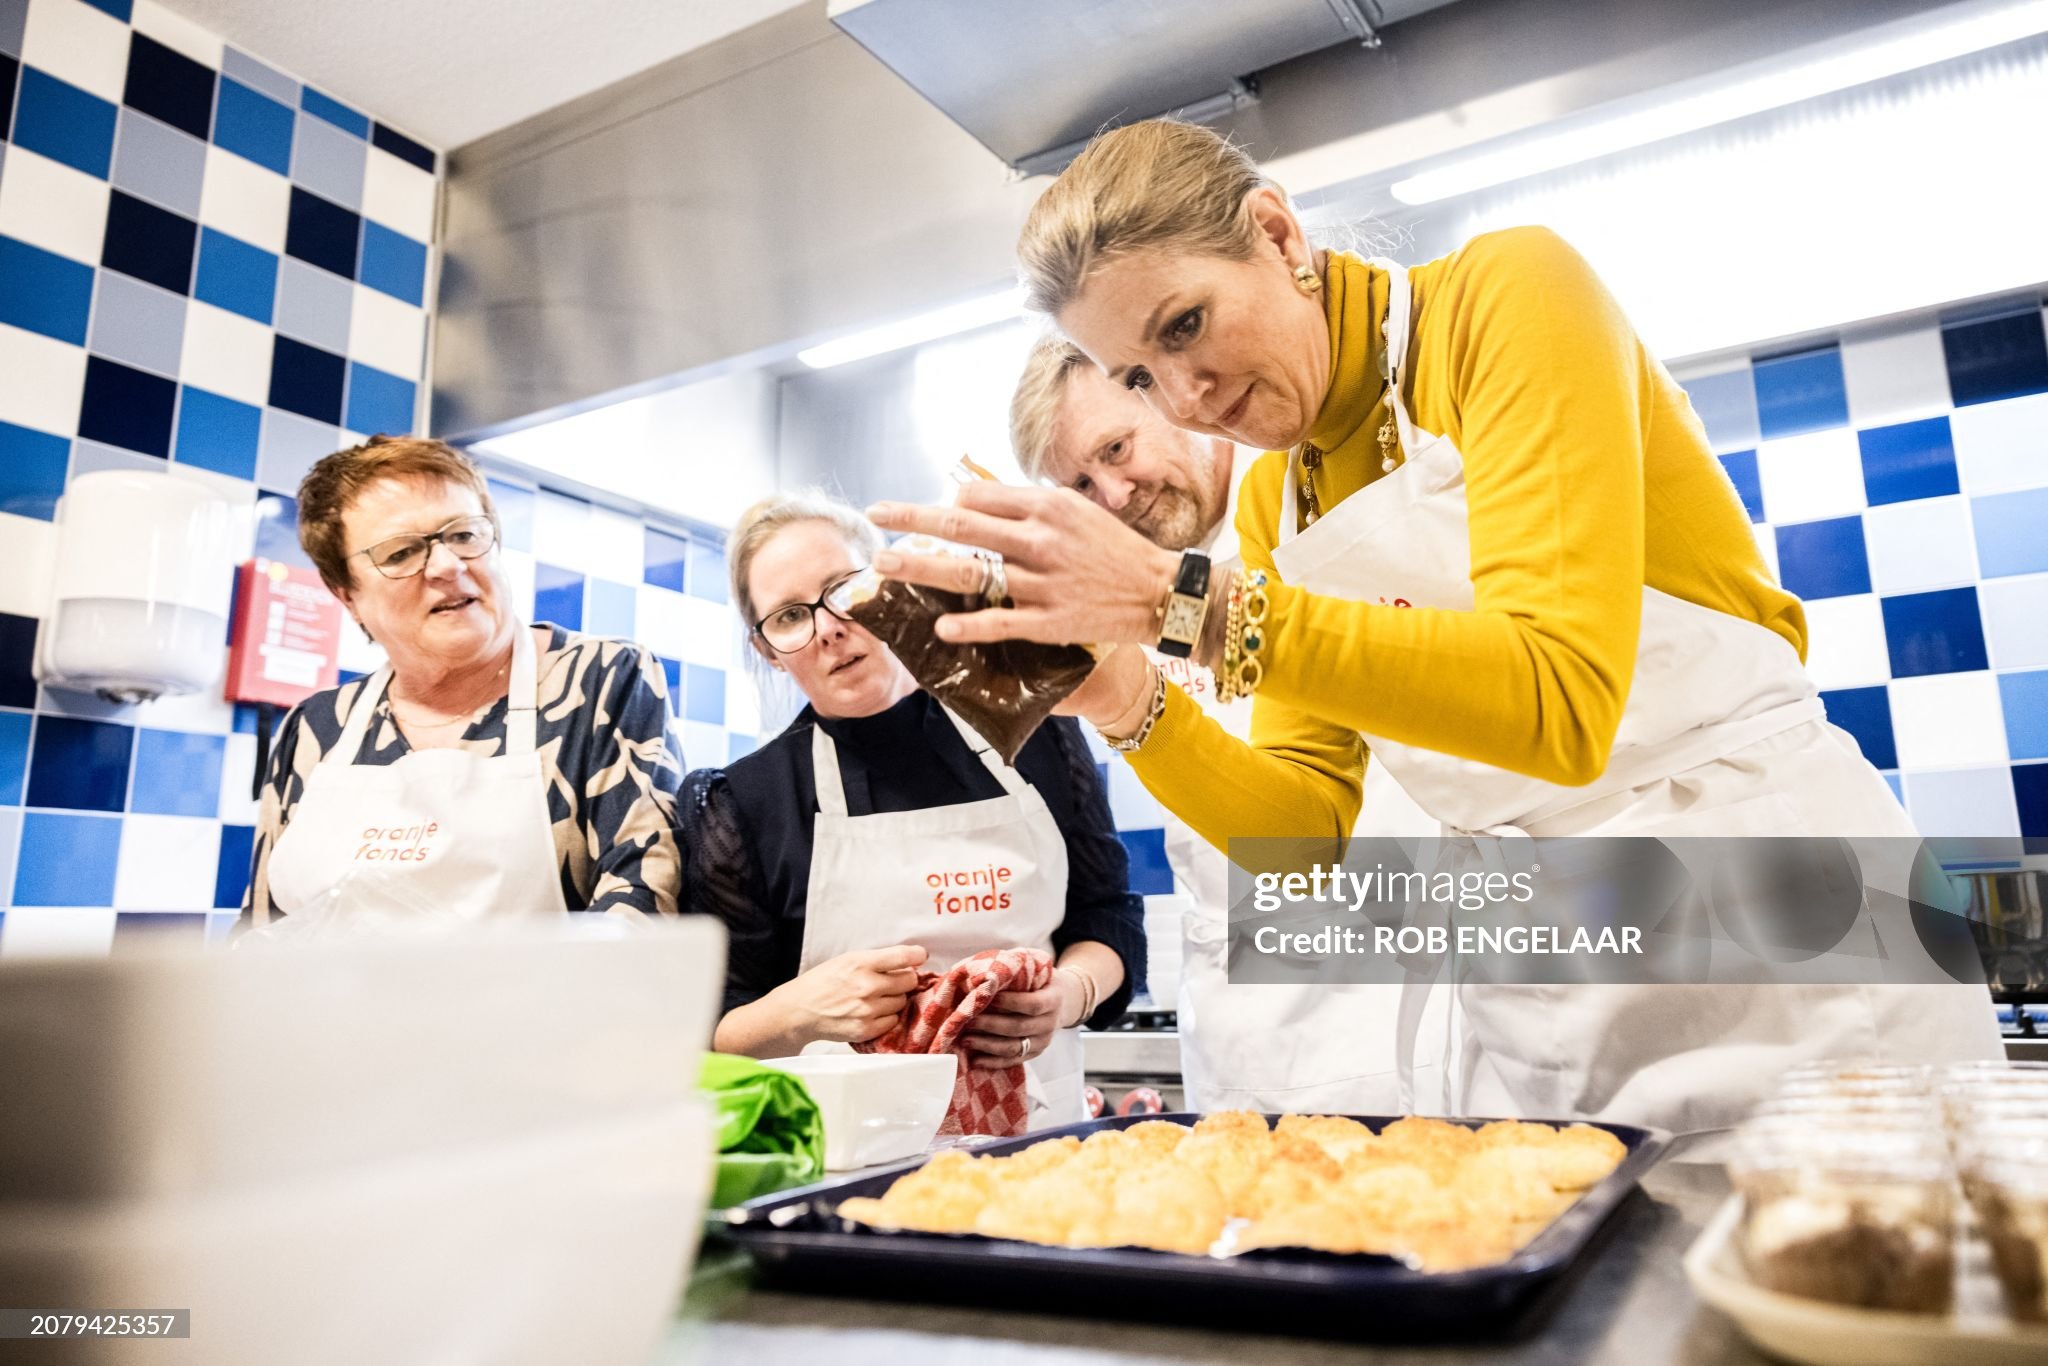 netherlands-royals-queen-maxima-volunteer-in-a-kitchen-during-the-20th-edition-of-nldoet-the.jpg?s=2048x2048&w=gi&k=20&c=lbsed2GdhyDebC4fa9JD9HH8Wa-KrtGTCQq2x77g2_A=